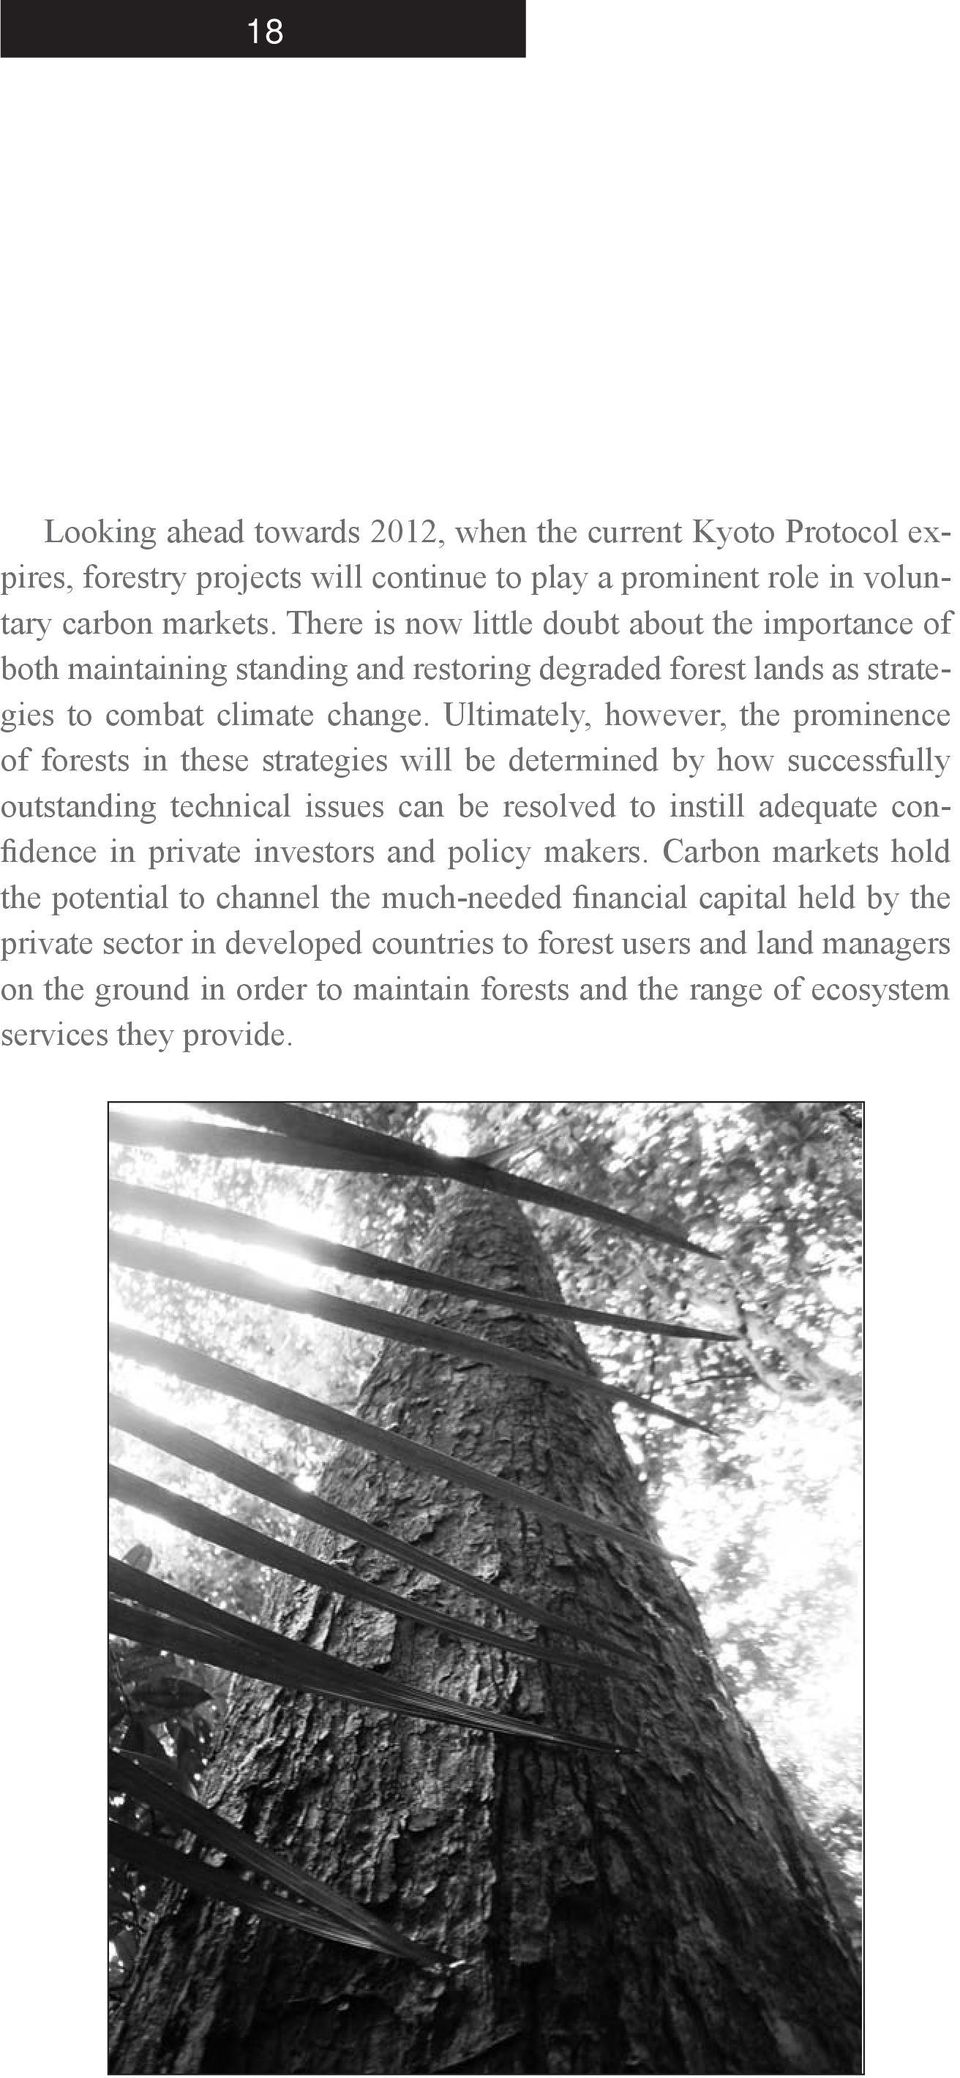 Ultimately, however, the prominence of forests in these strategies will be determined by how successfully outstanding technical issues can be resolved to instill adequate confidence in private